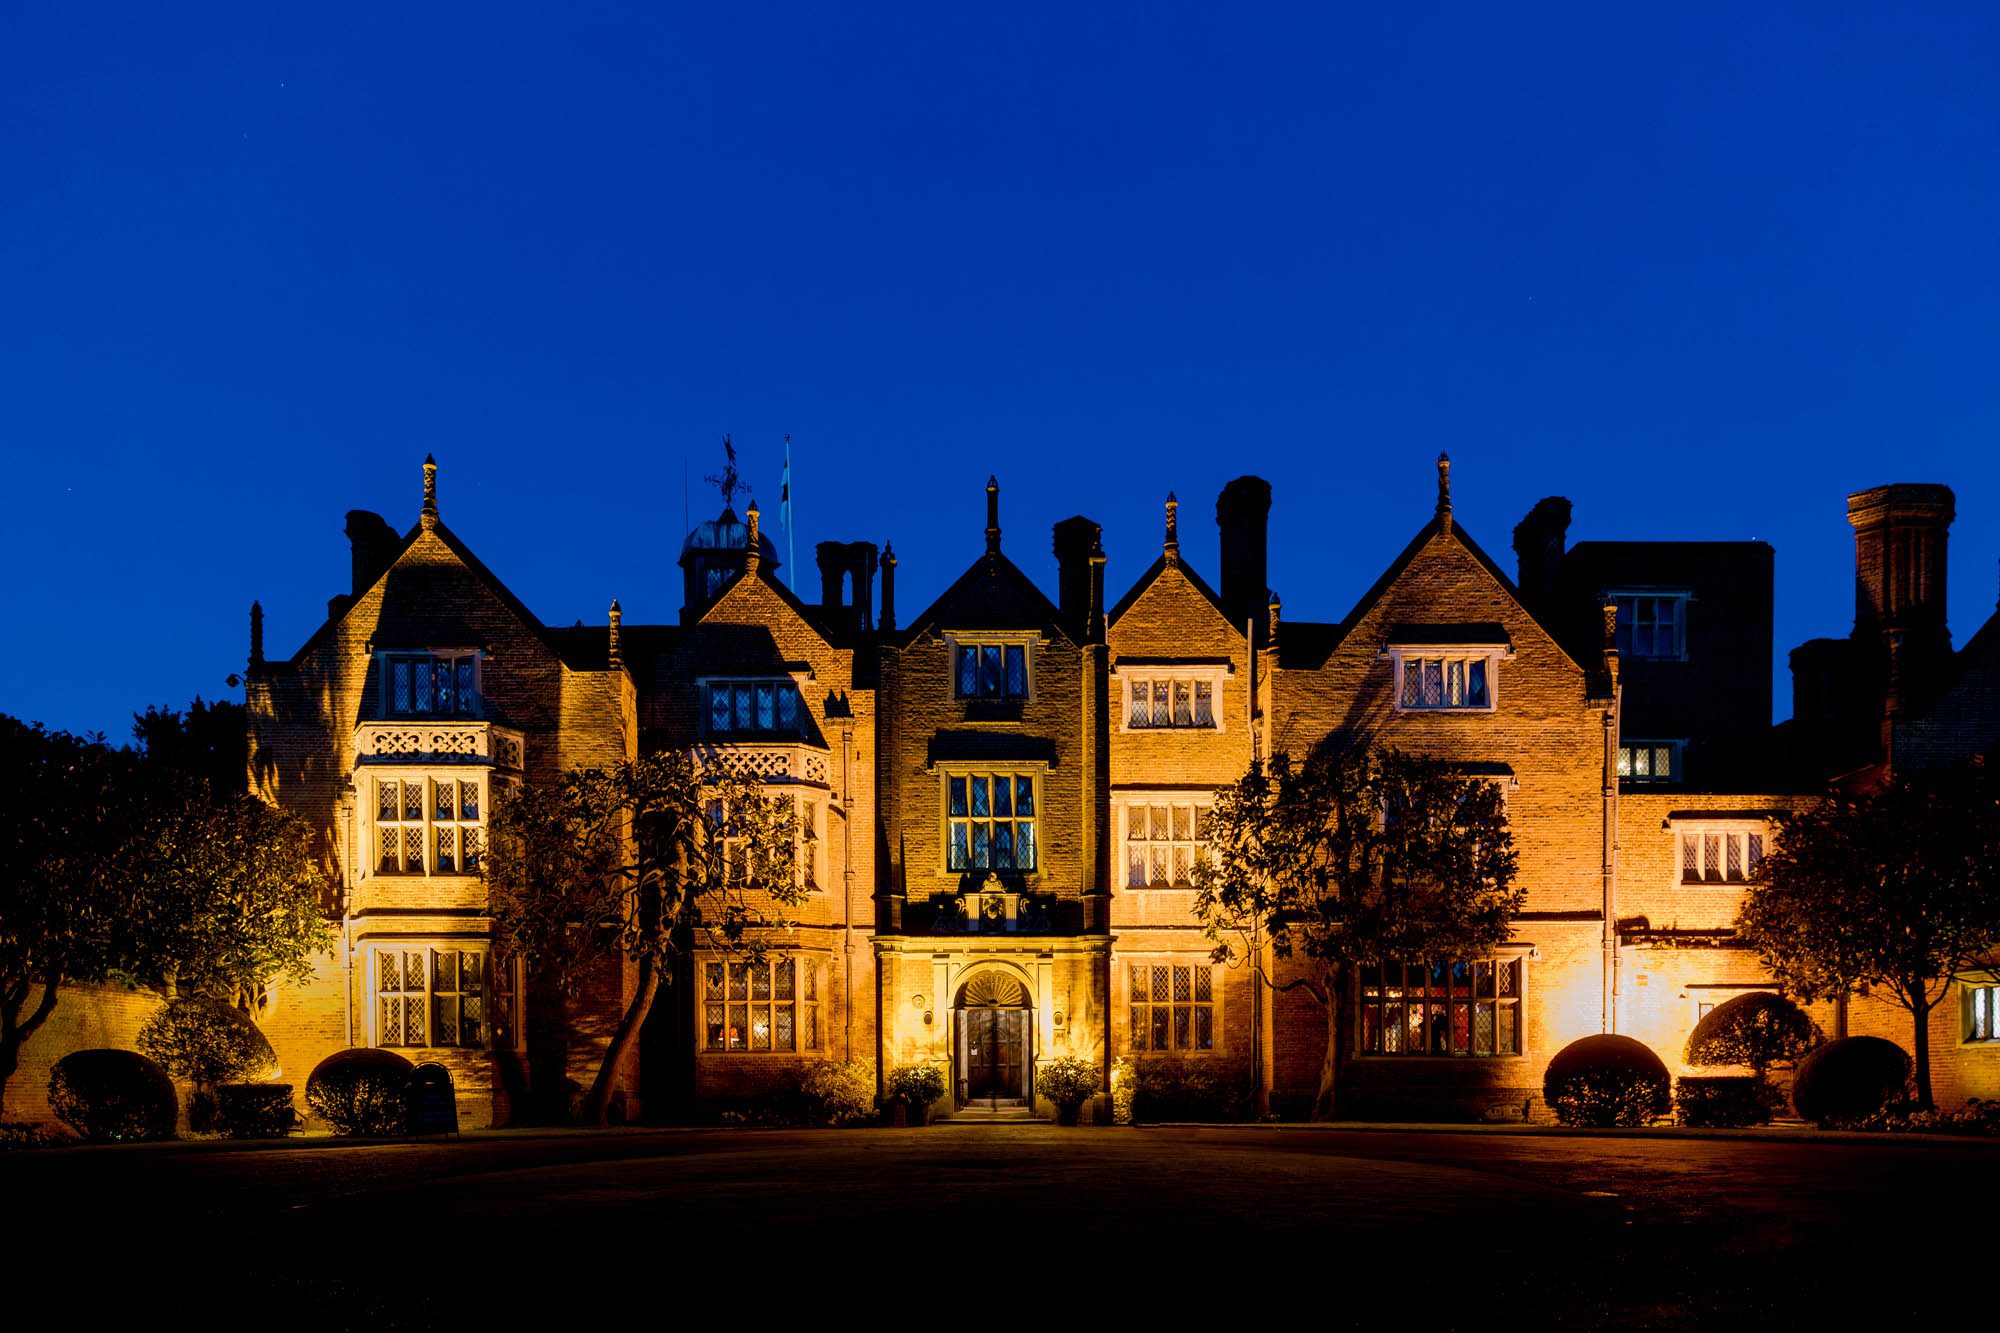 Great Fosters hotel in egham during the blue hour.